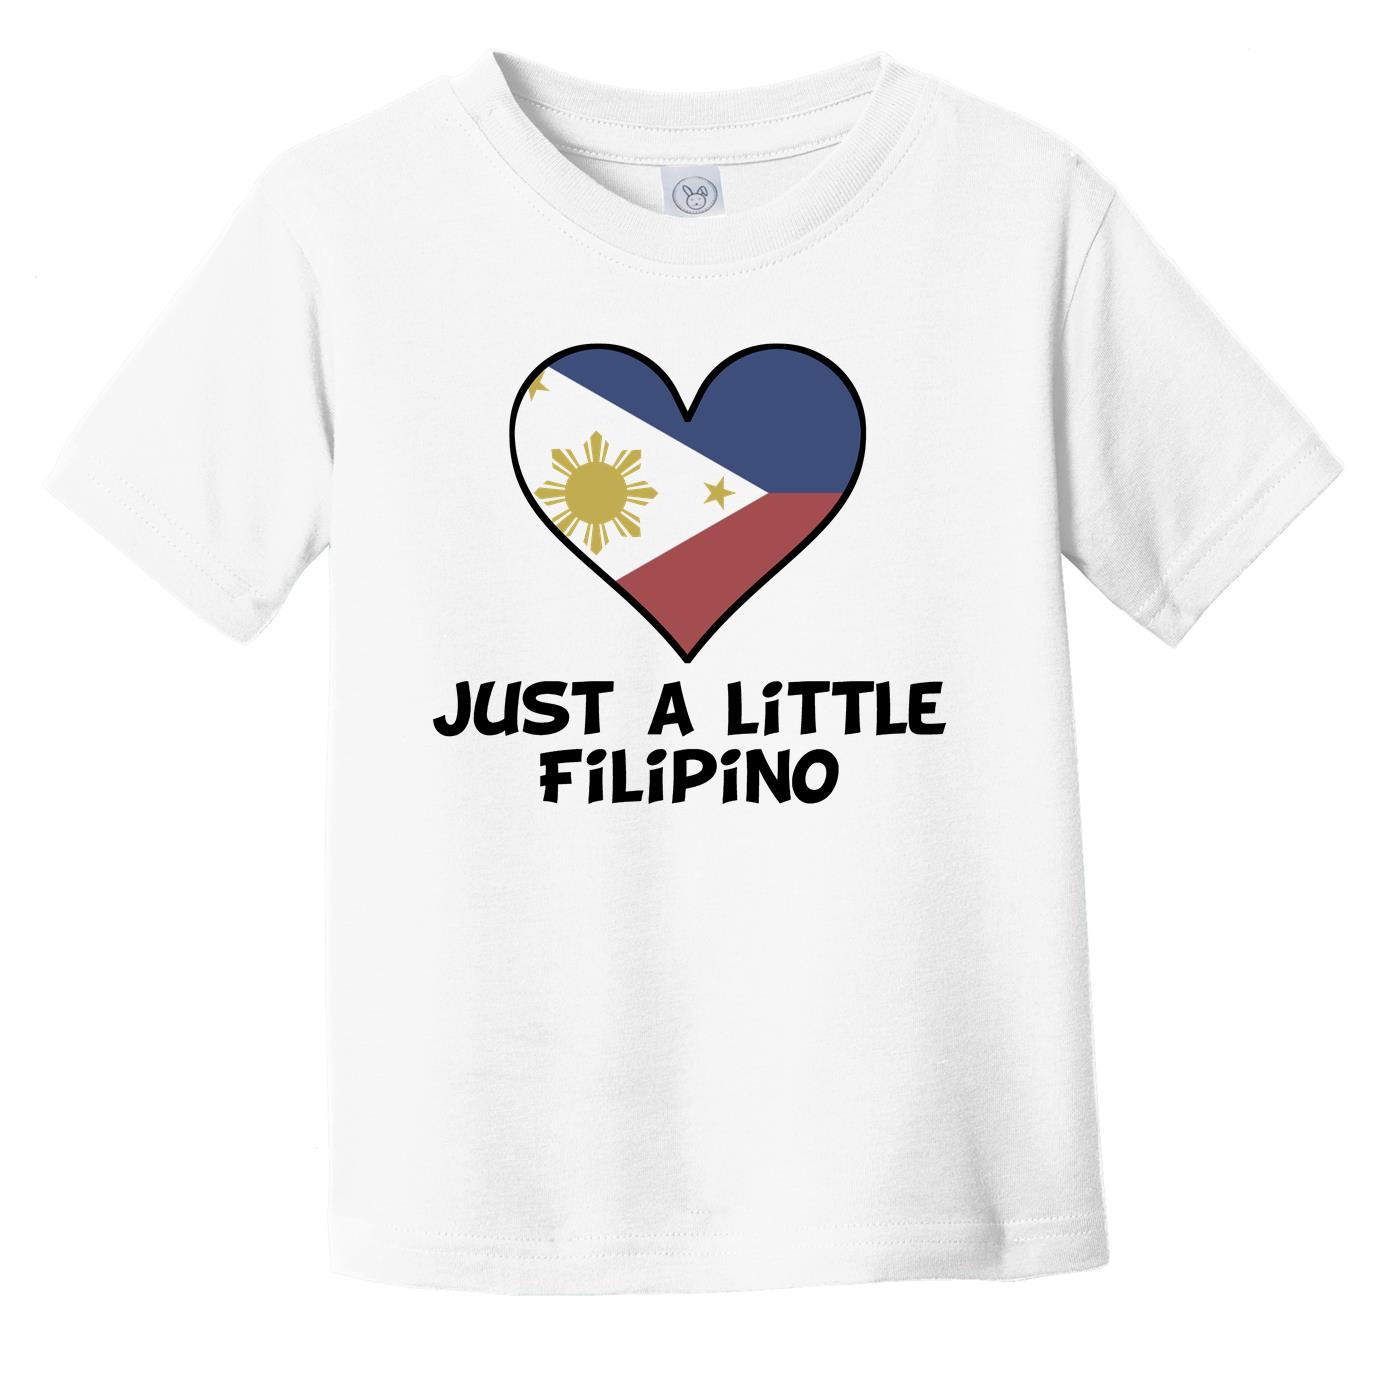 Just A Little Filipino T-Shirt - Funny Philippines Flag Infant Toddler Shirt